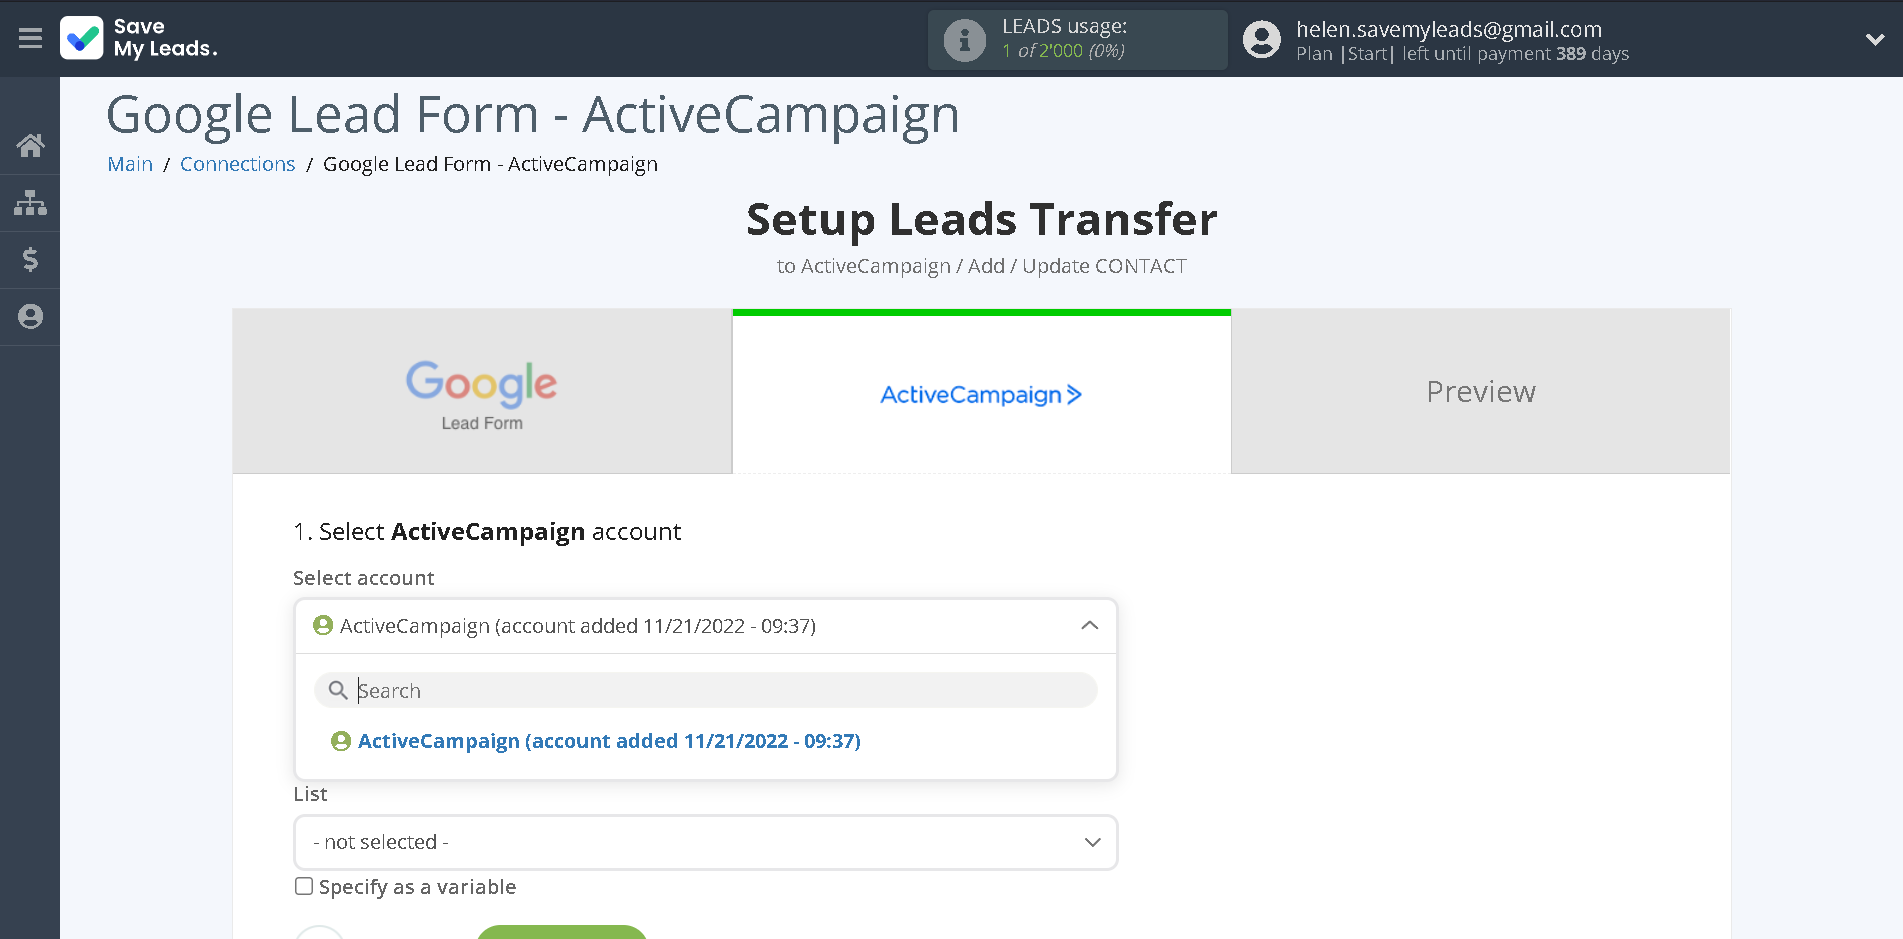 How to Connect Google Lead Form with ActiveCampaign Create Contacts | Data Destination account selection